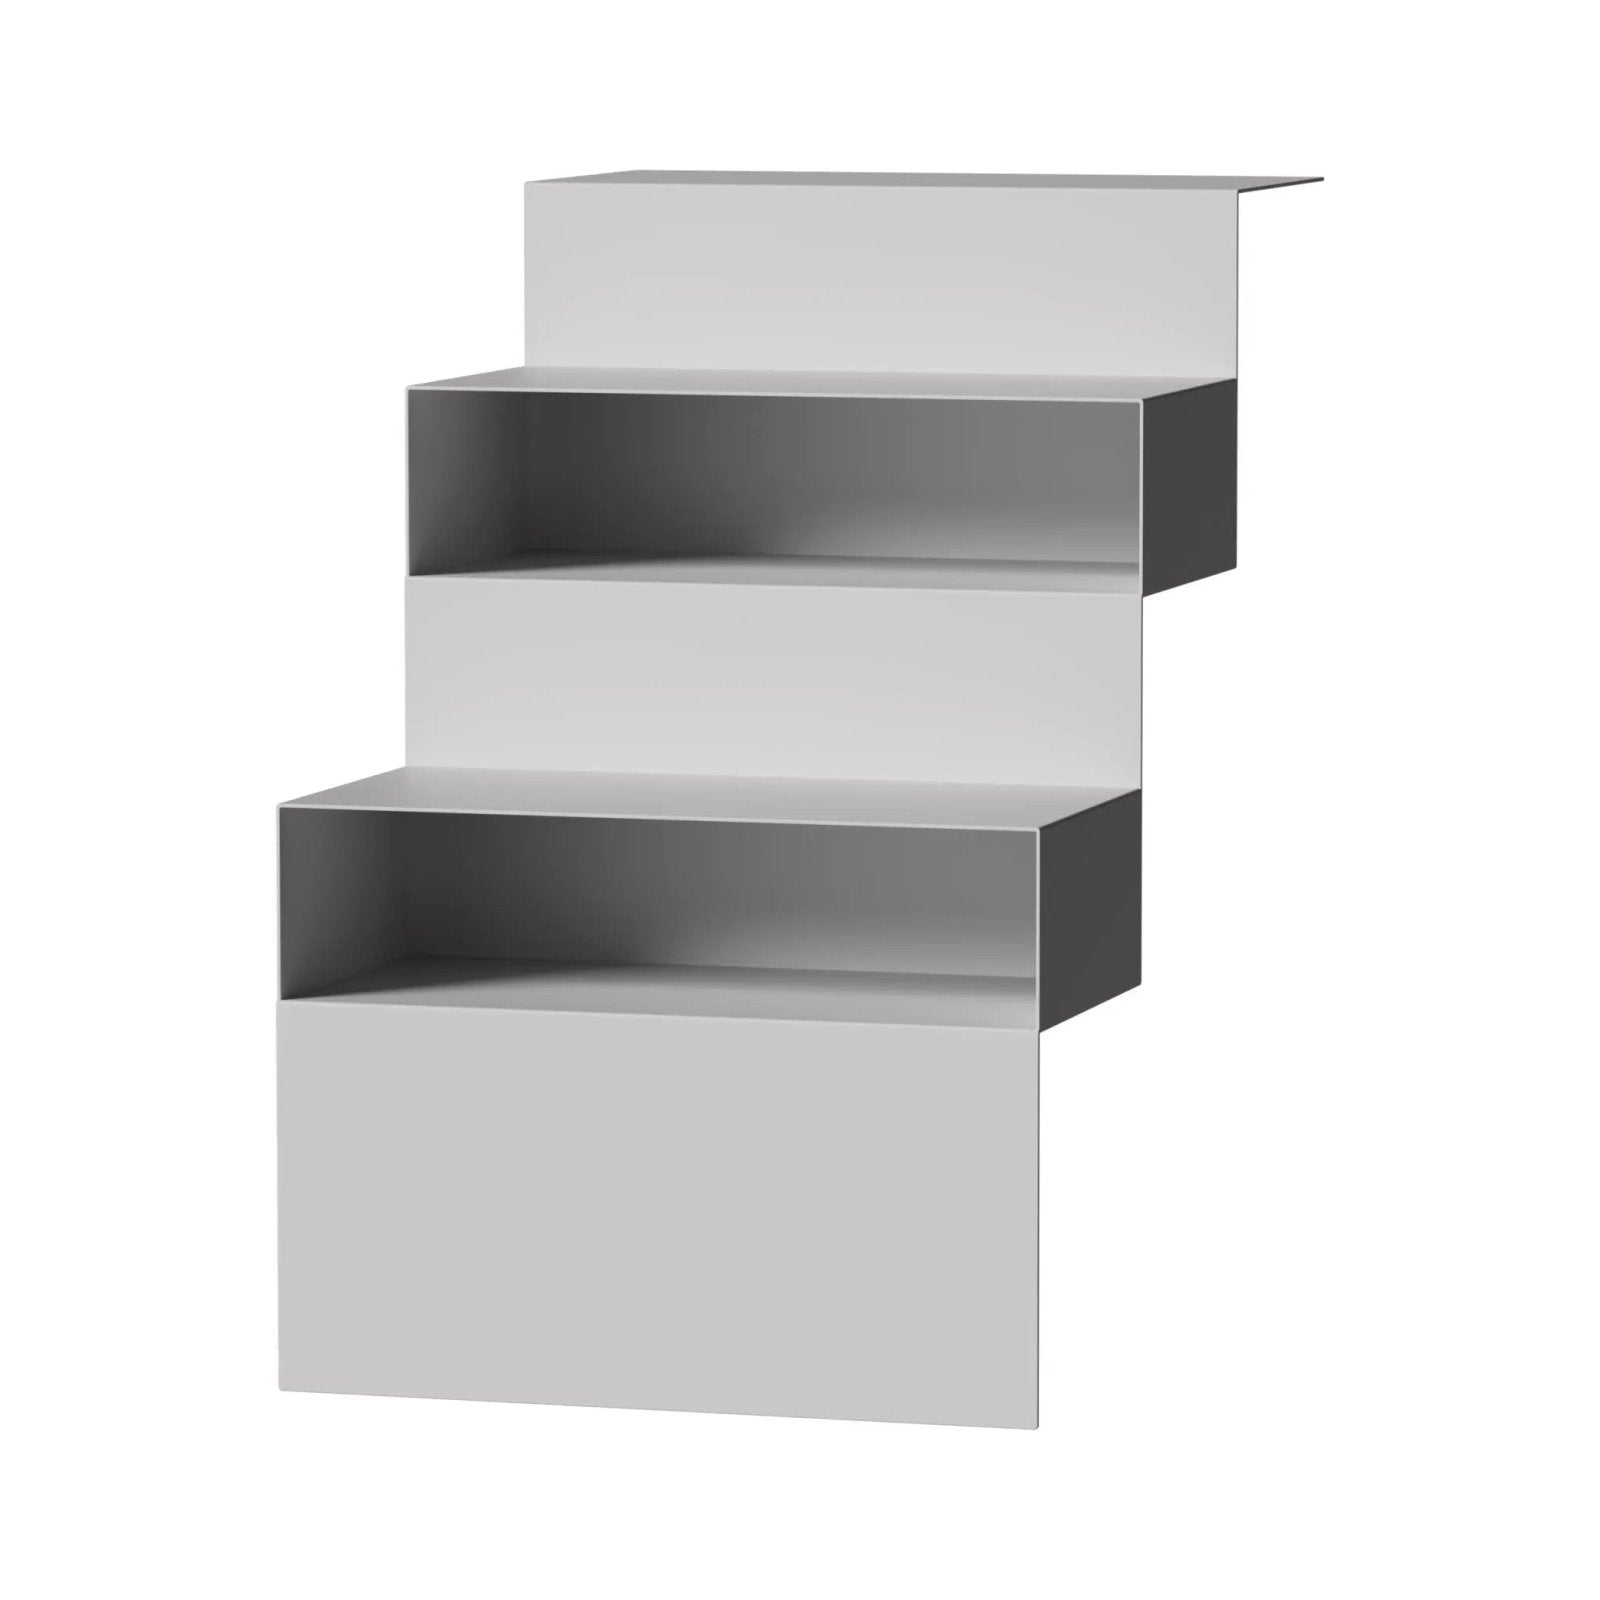 STAIRS - Shelf Shelf from IN SUBSTANCE